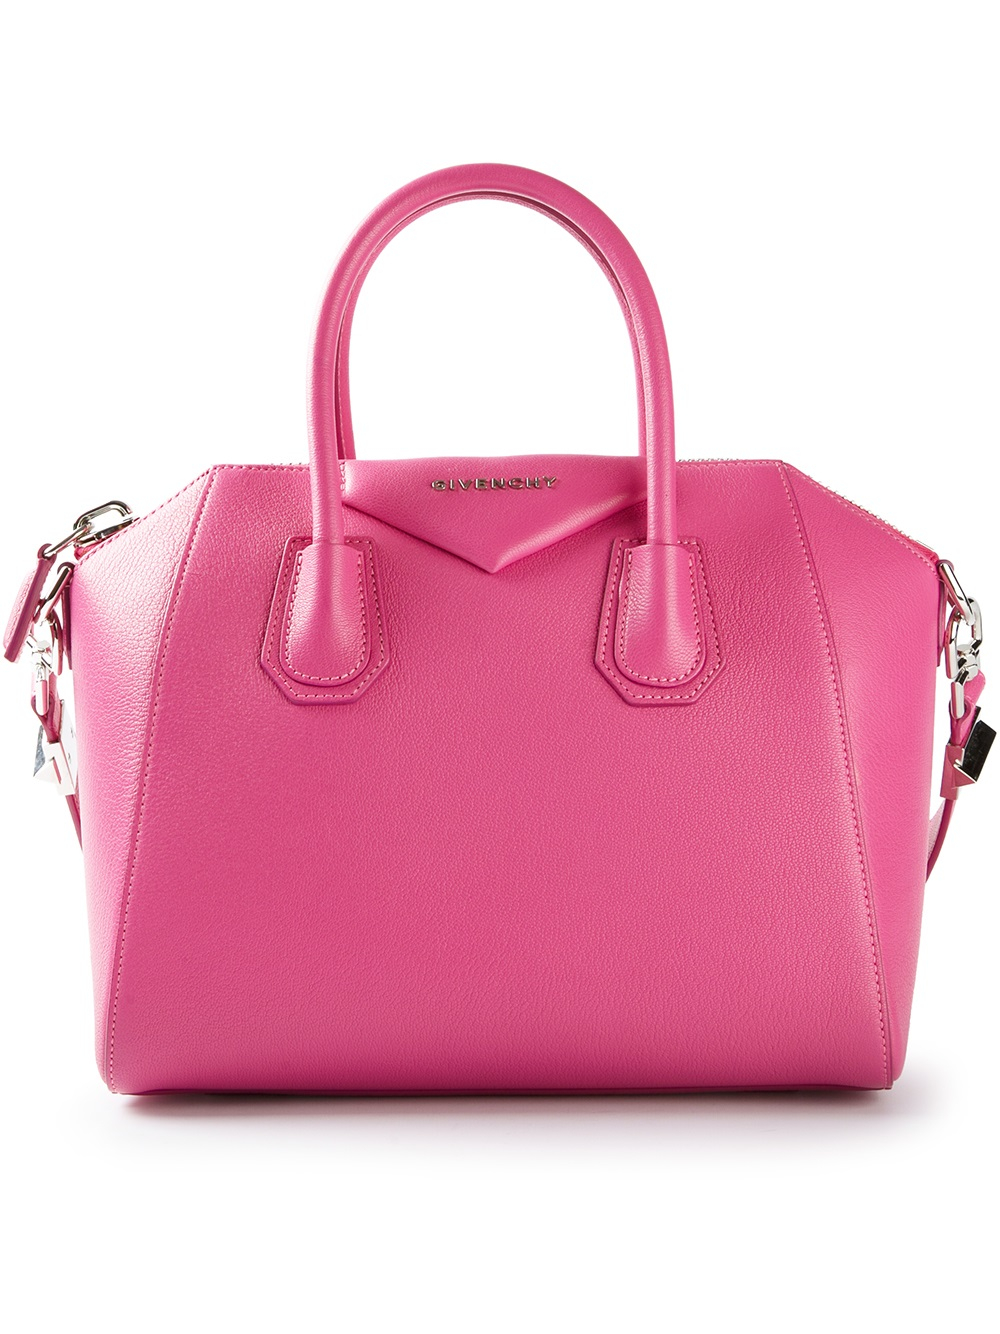 Lyst - Givenchy Small Antigona Tote in Pink